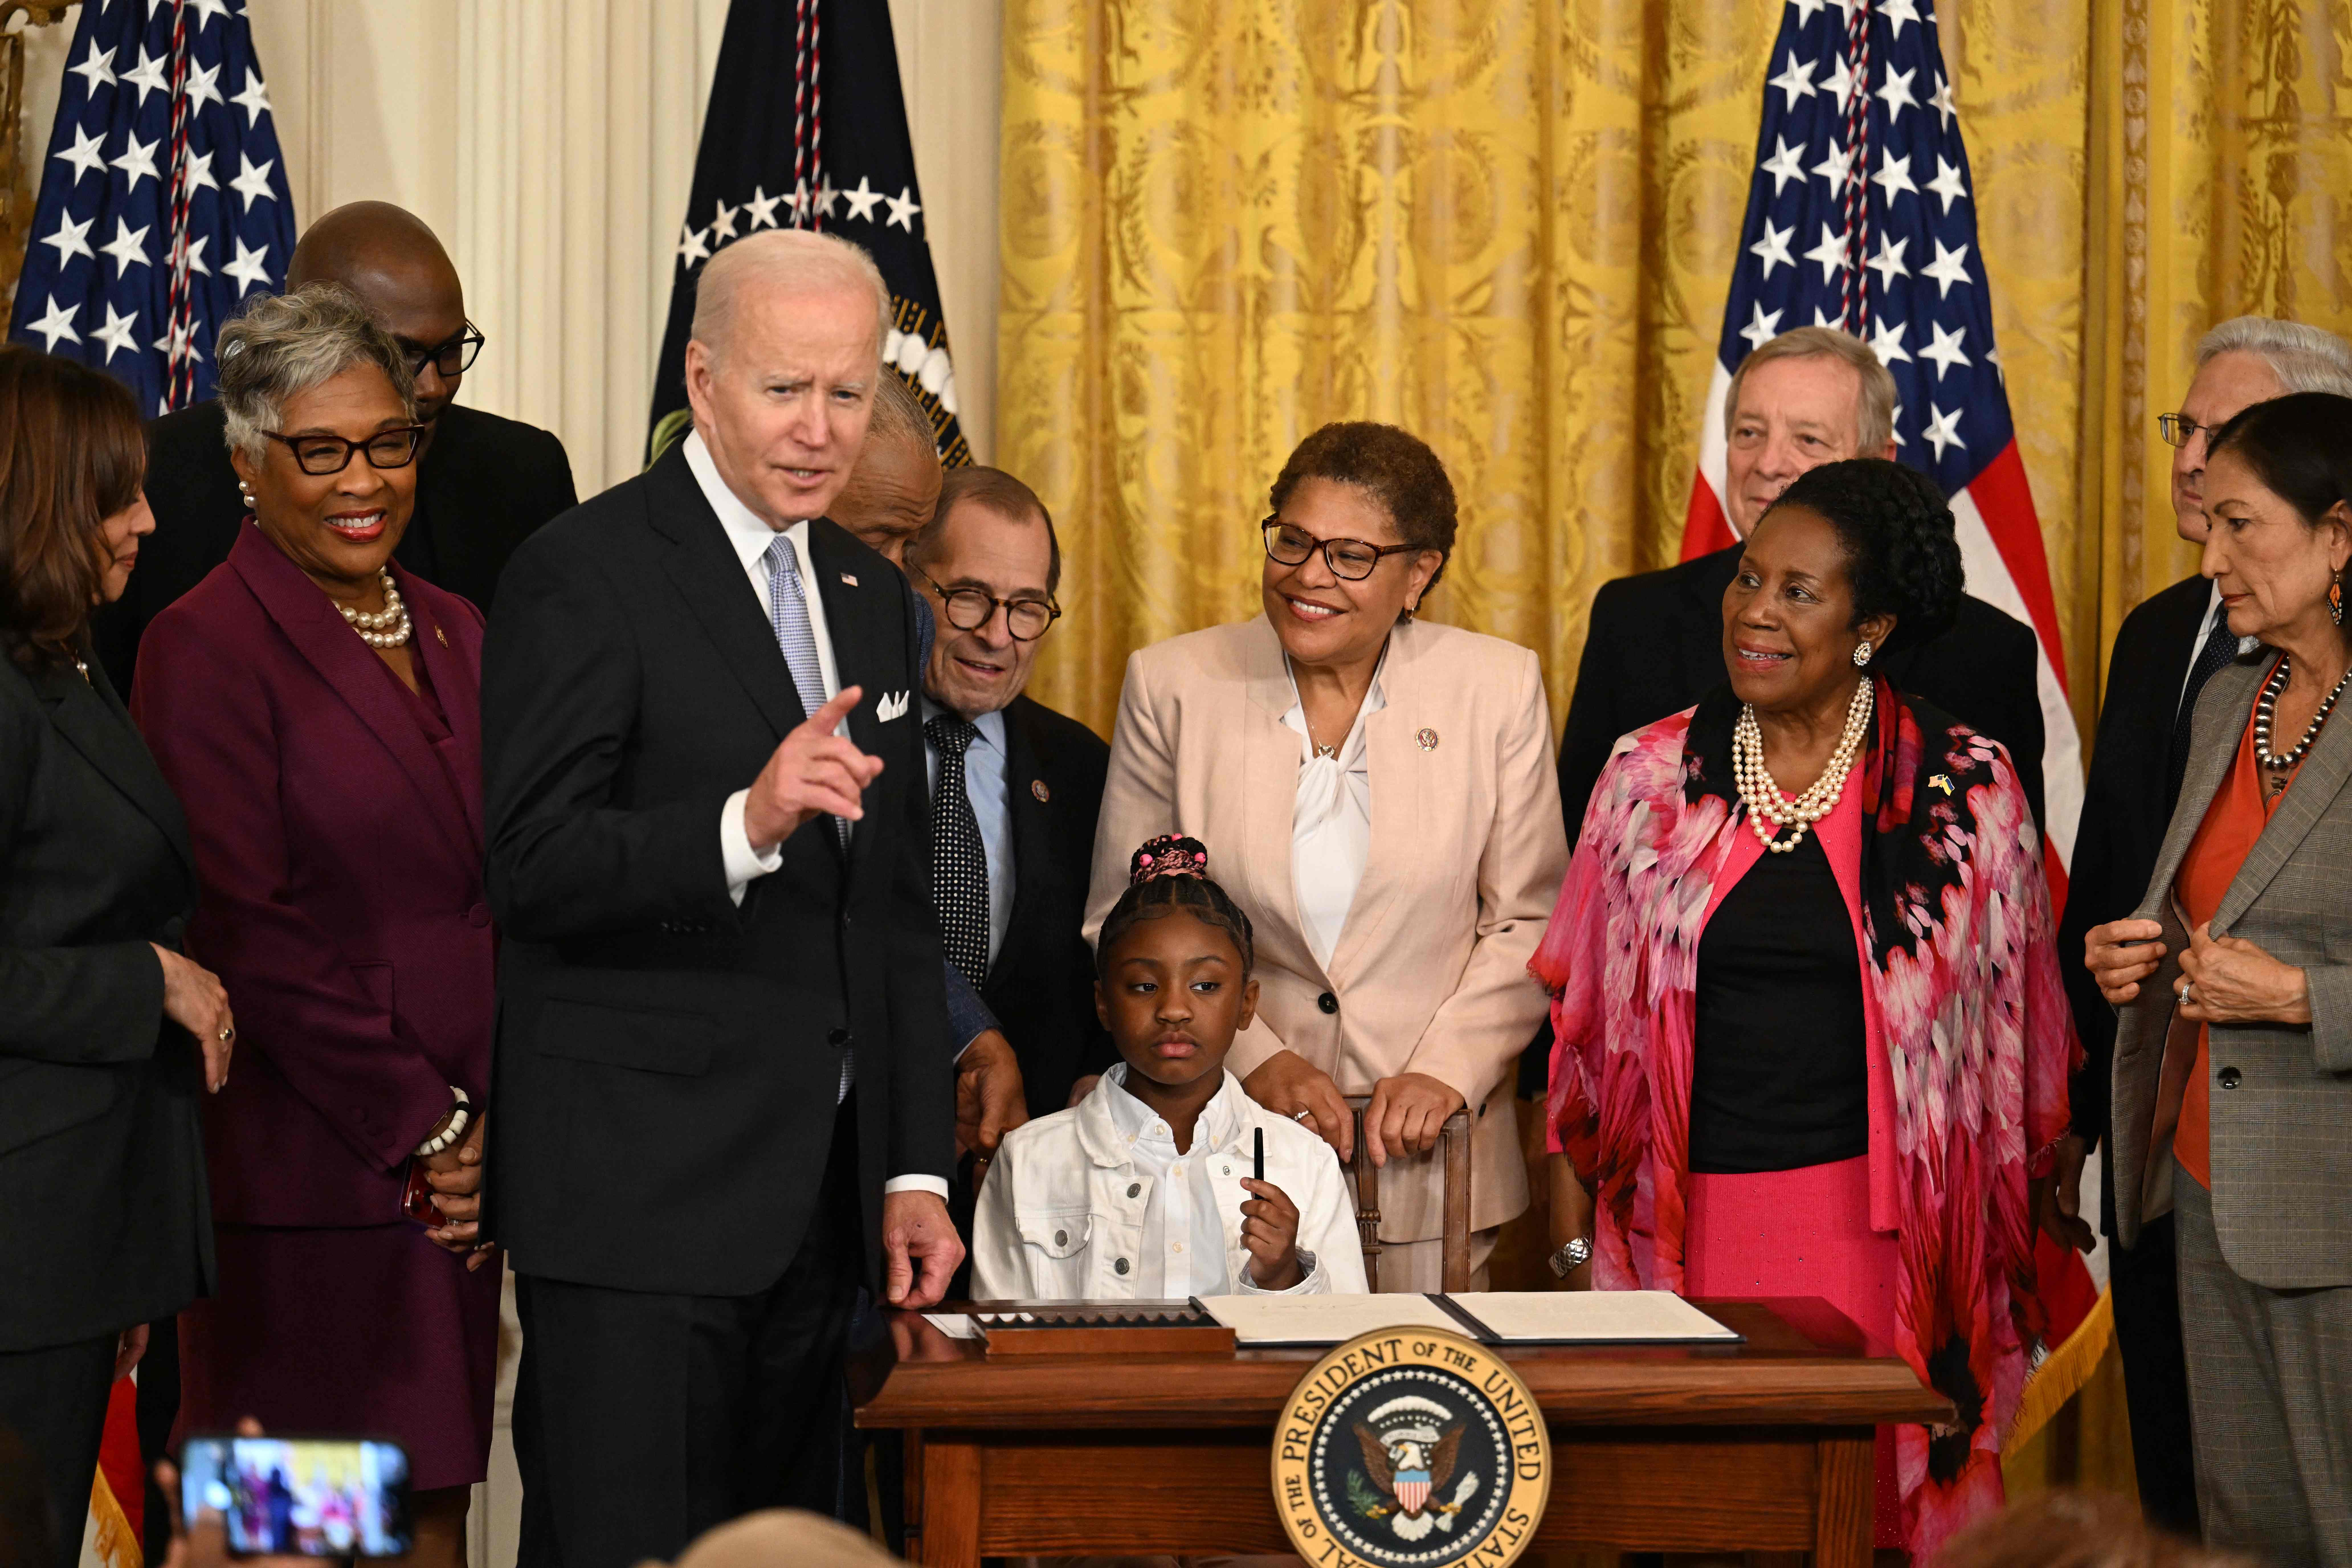 Gianna Floyd, daughter of George Floyd, holds a pen during a signing ceremony in the East Room of the White House, where President Biden signed an Executive Order to advance policing and strengthen public safety